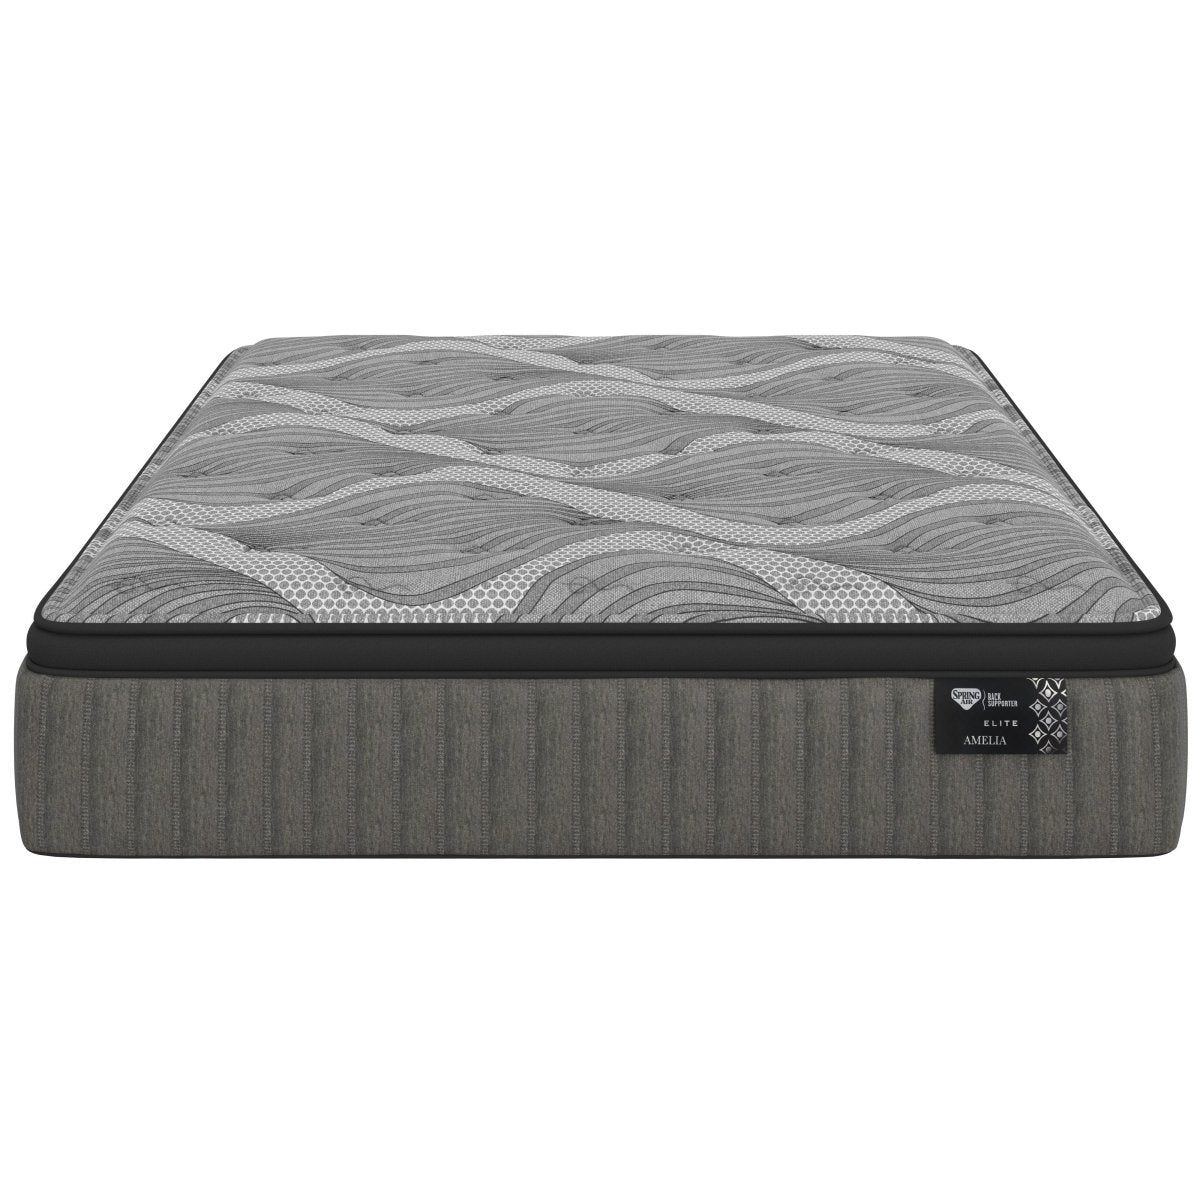 Restwell Sleep Products - Back Supporter Elite Amelia - Canadian Mattress